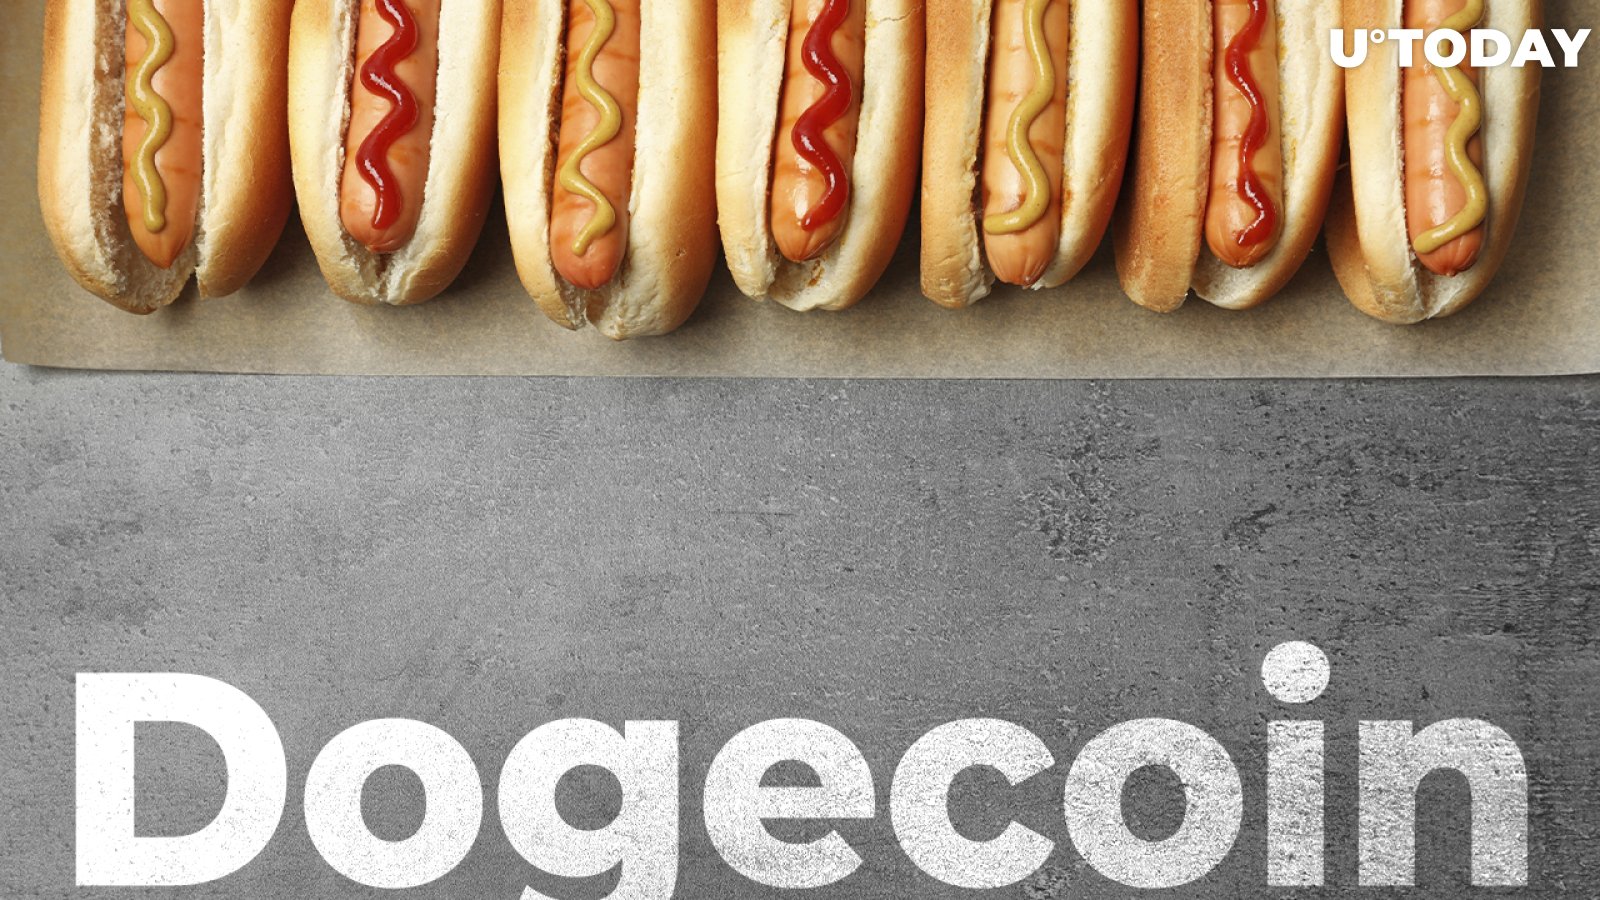 Dogecoin Fans Offered 50% Discount by This Hot Dog Restaurant